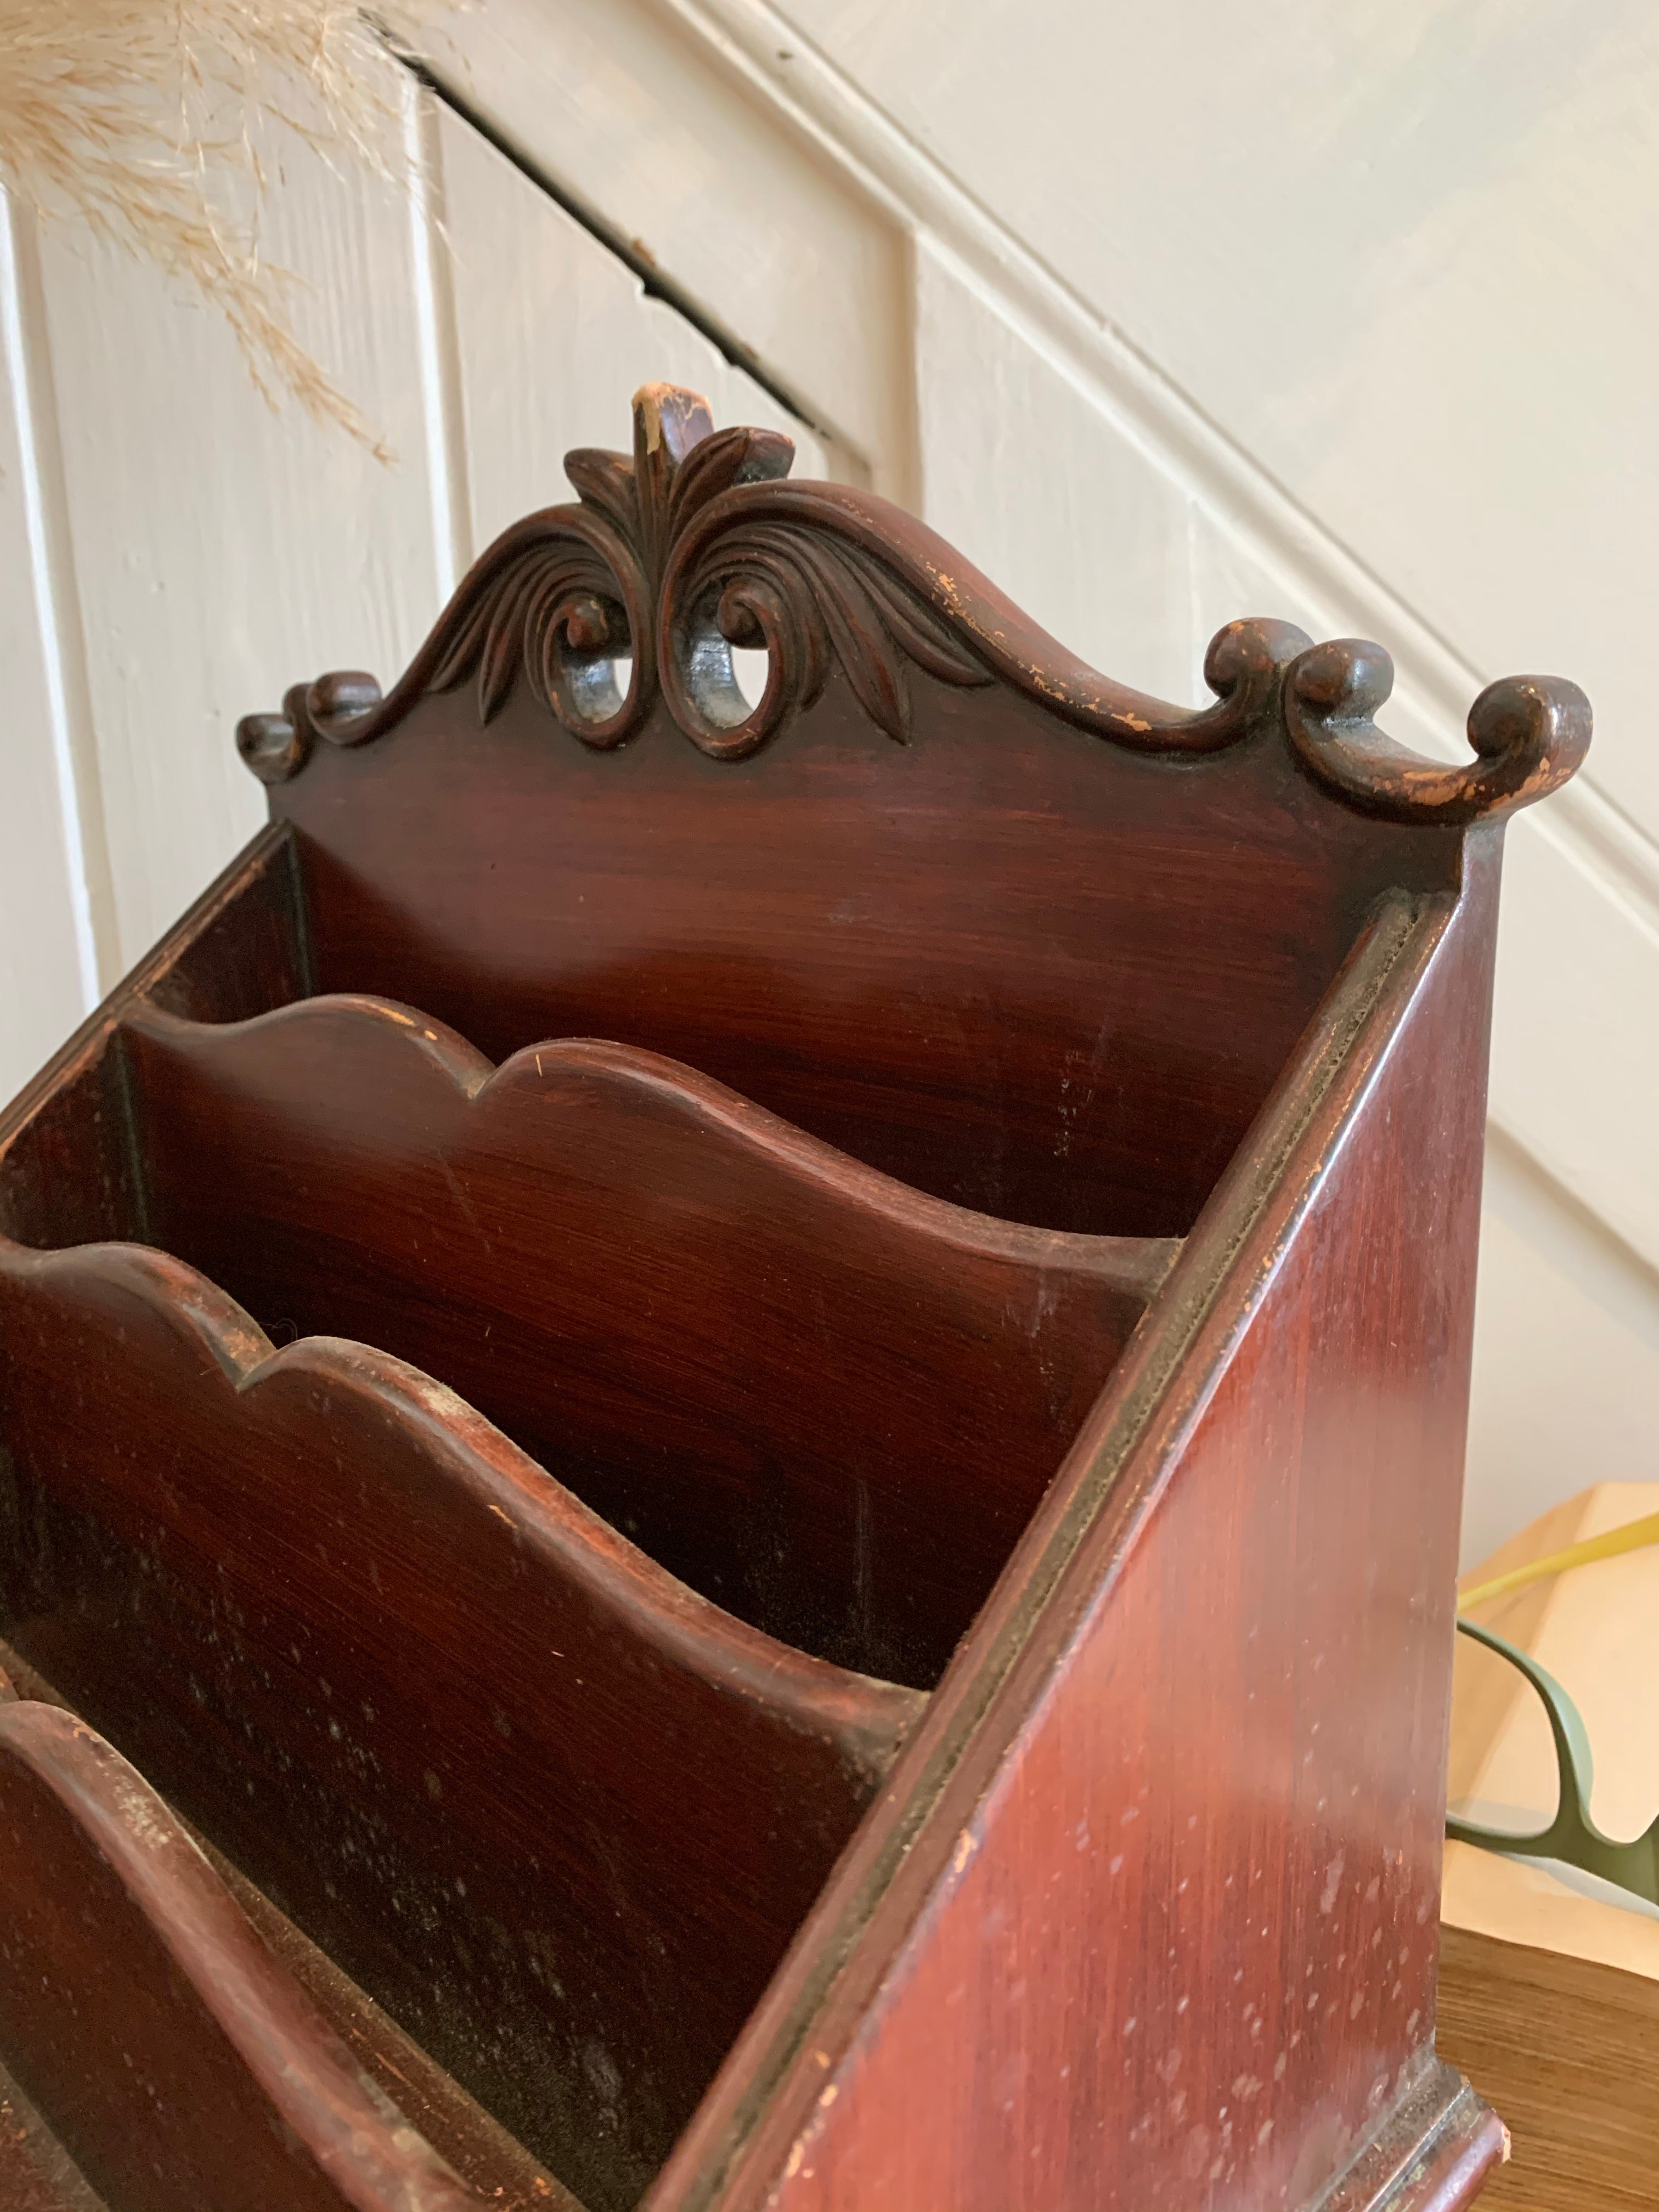 Timeworn Antique Letter Rack with Drawer